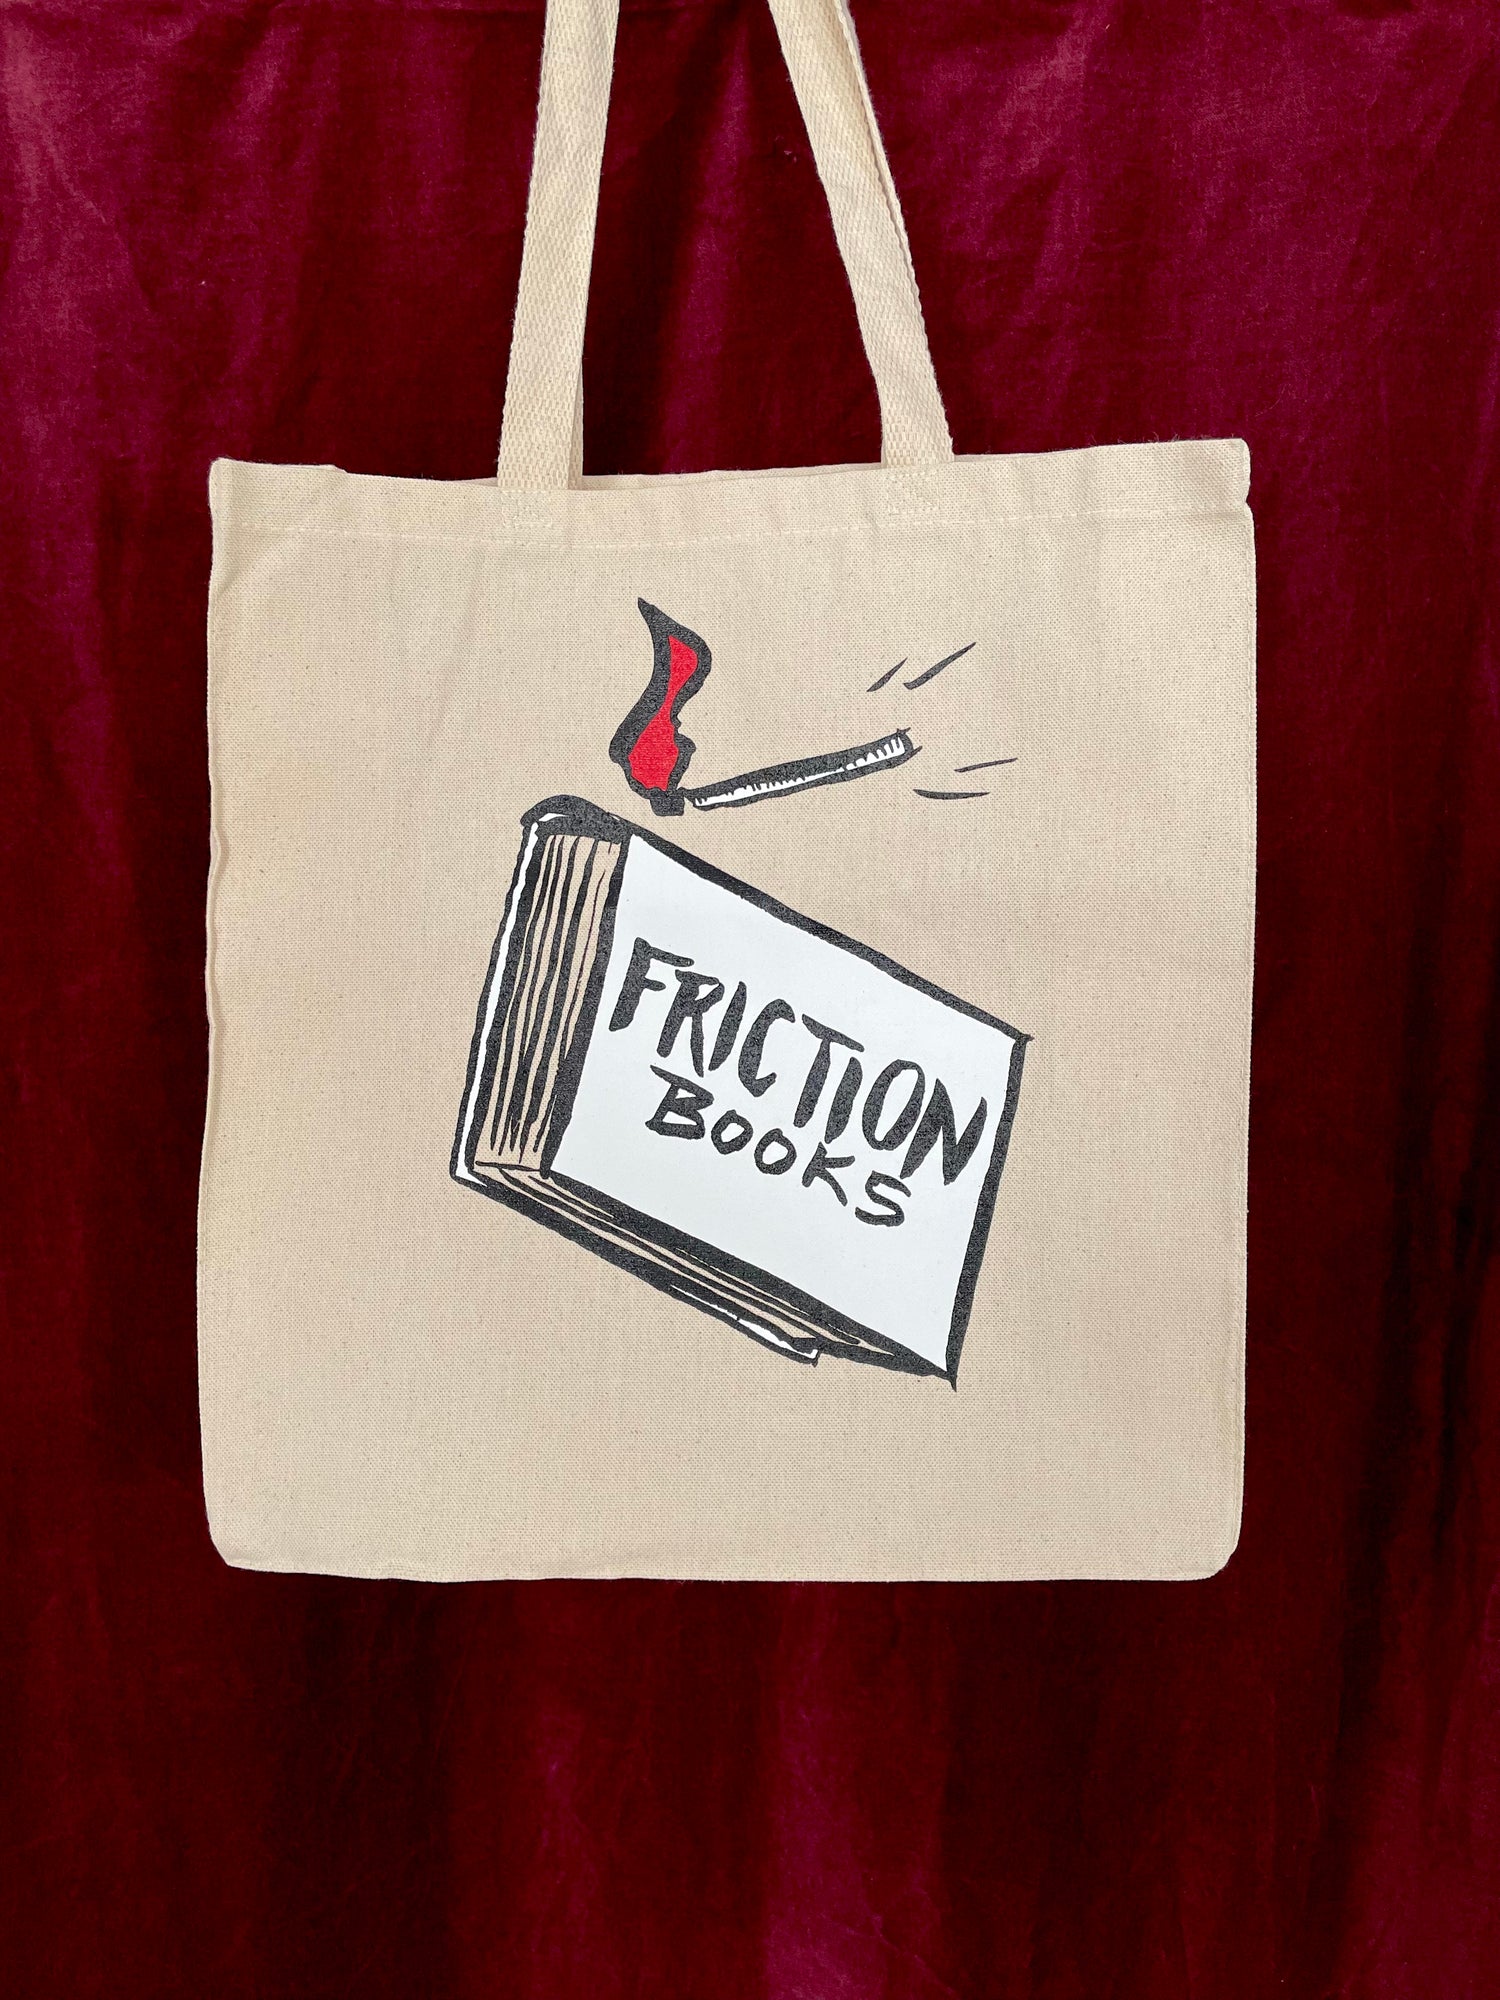 Merchandise for Friction & Friends